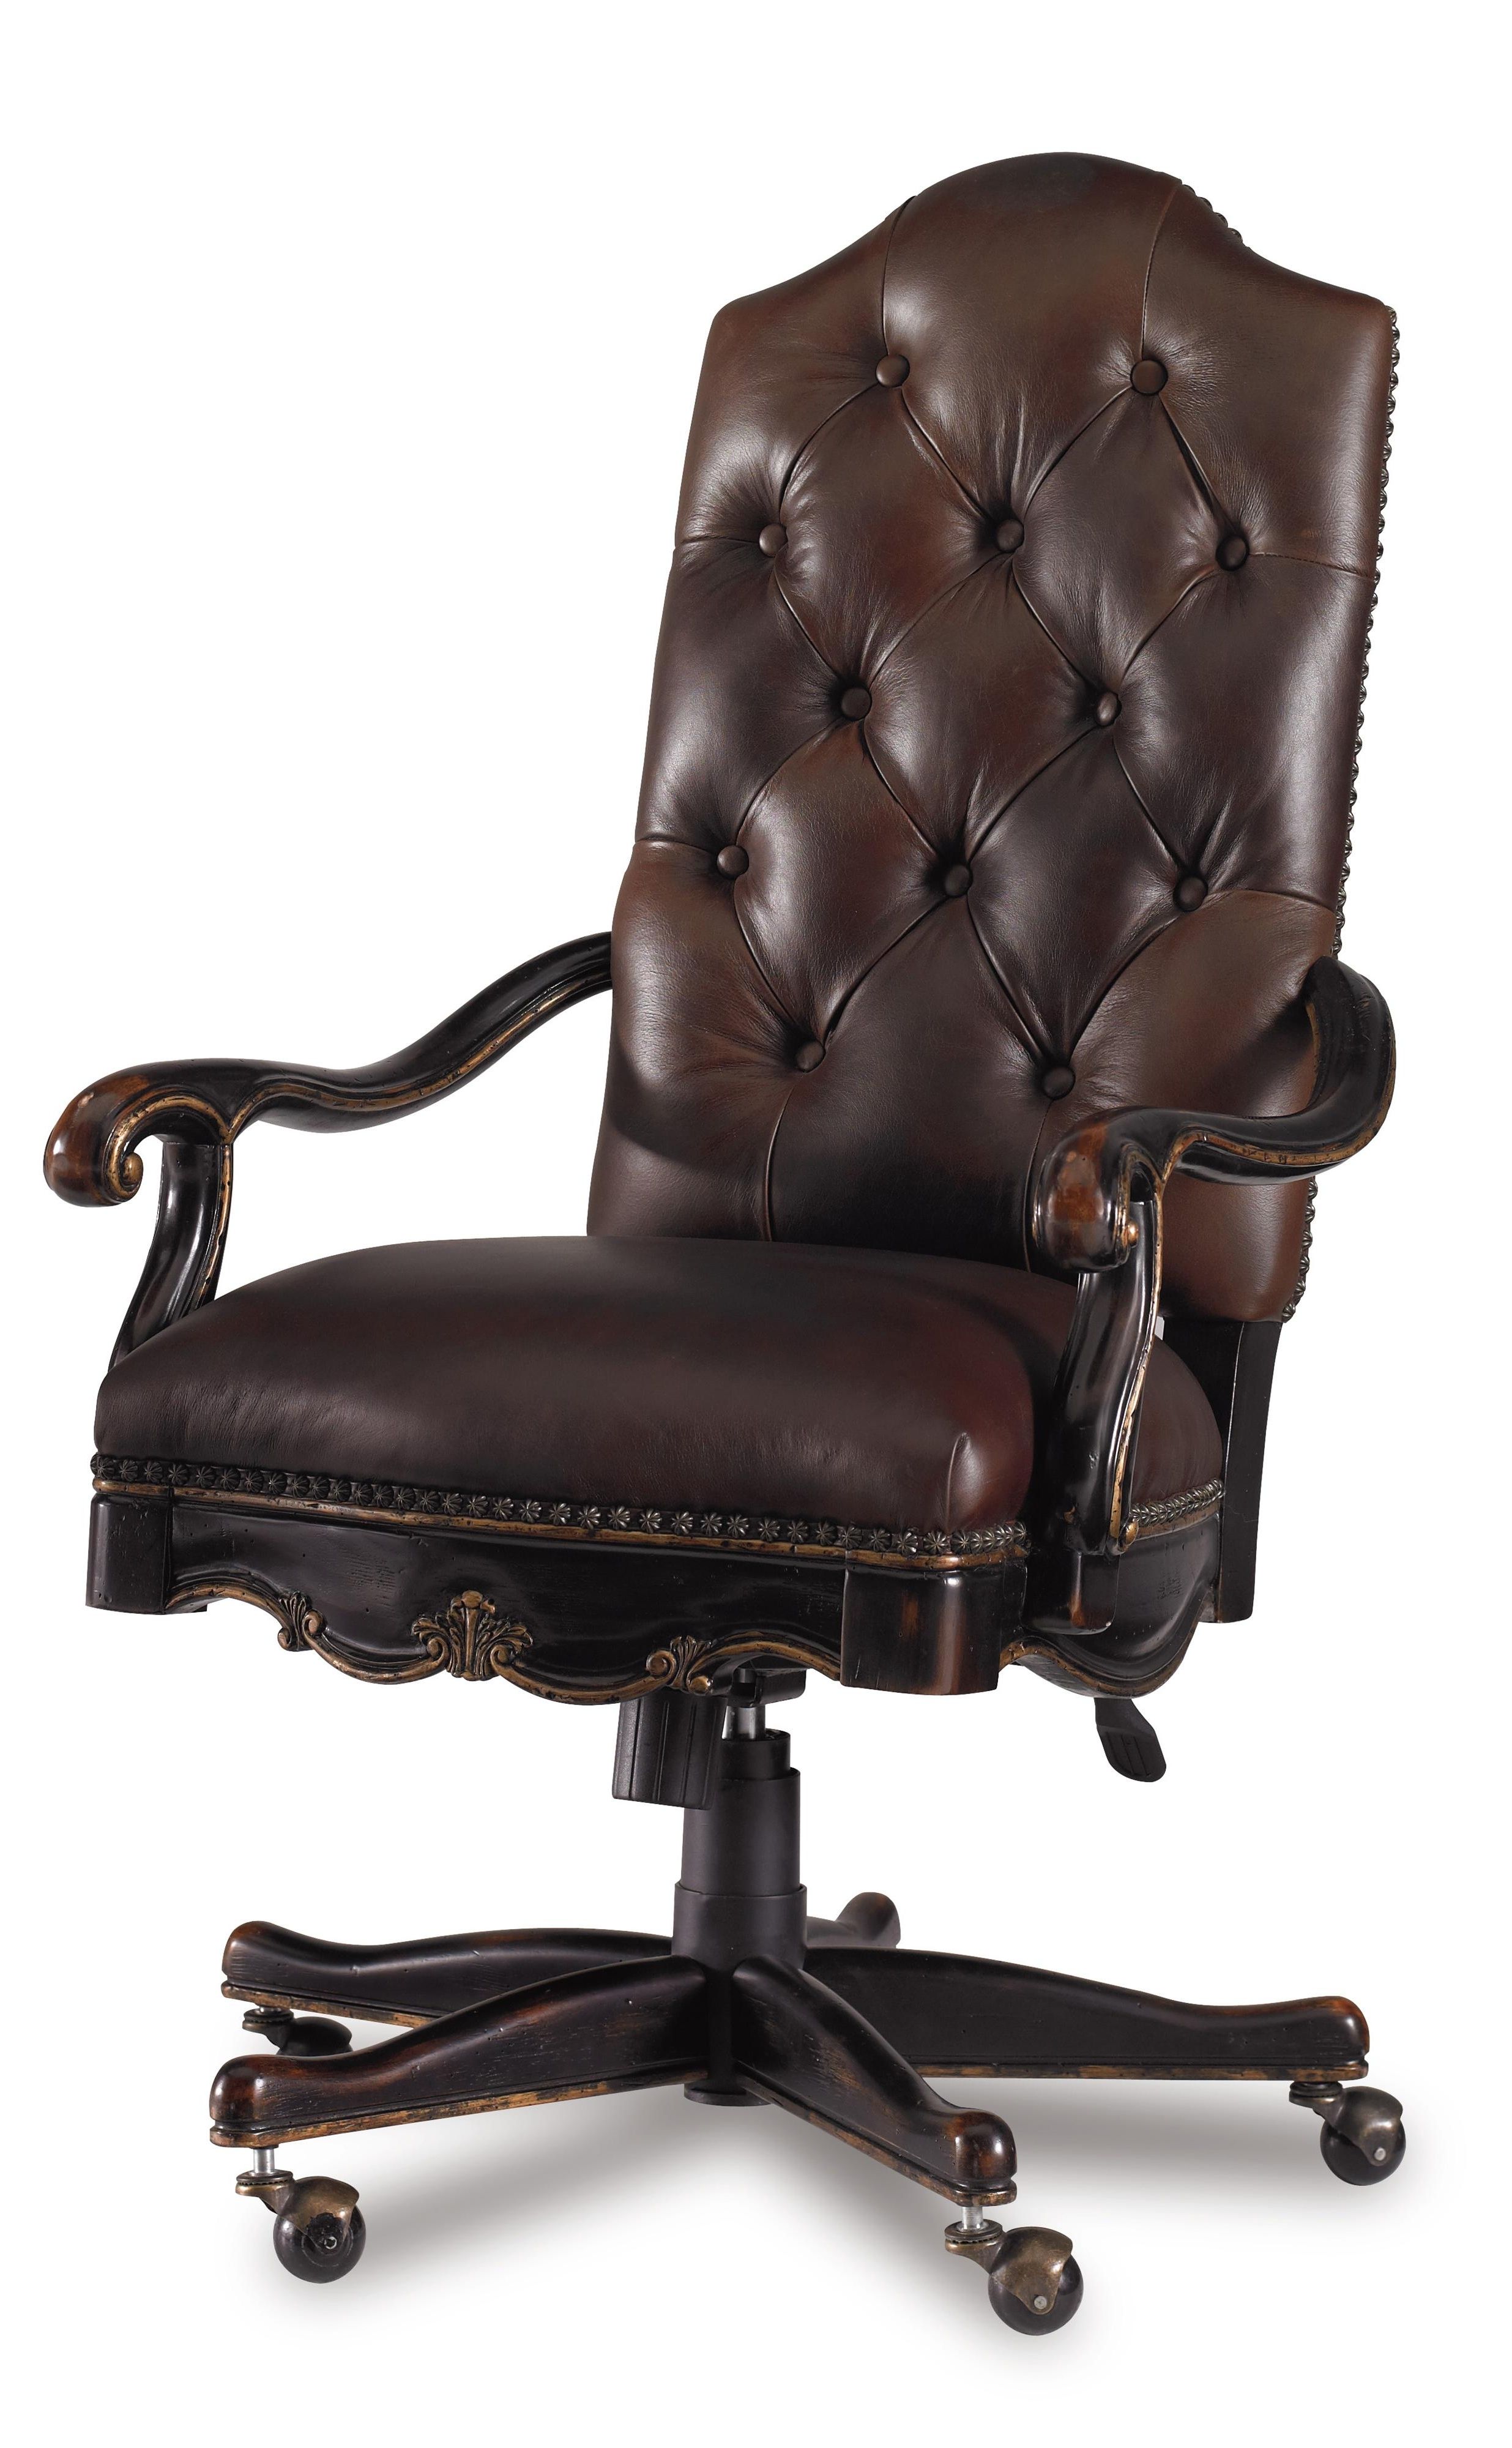 Tall Executive Office Chairs Pertaining To Recent Chair : Martinez Executive Tilt Leather Office Chair Big And Tall (View 5 of 20)